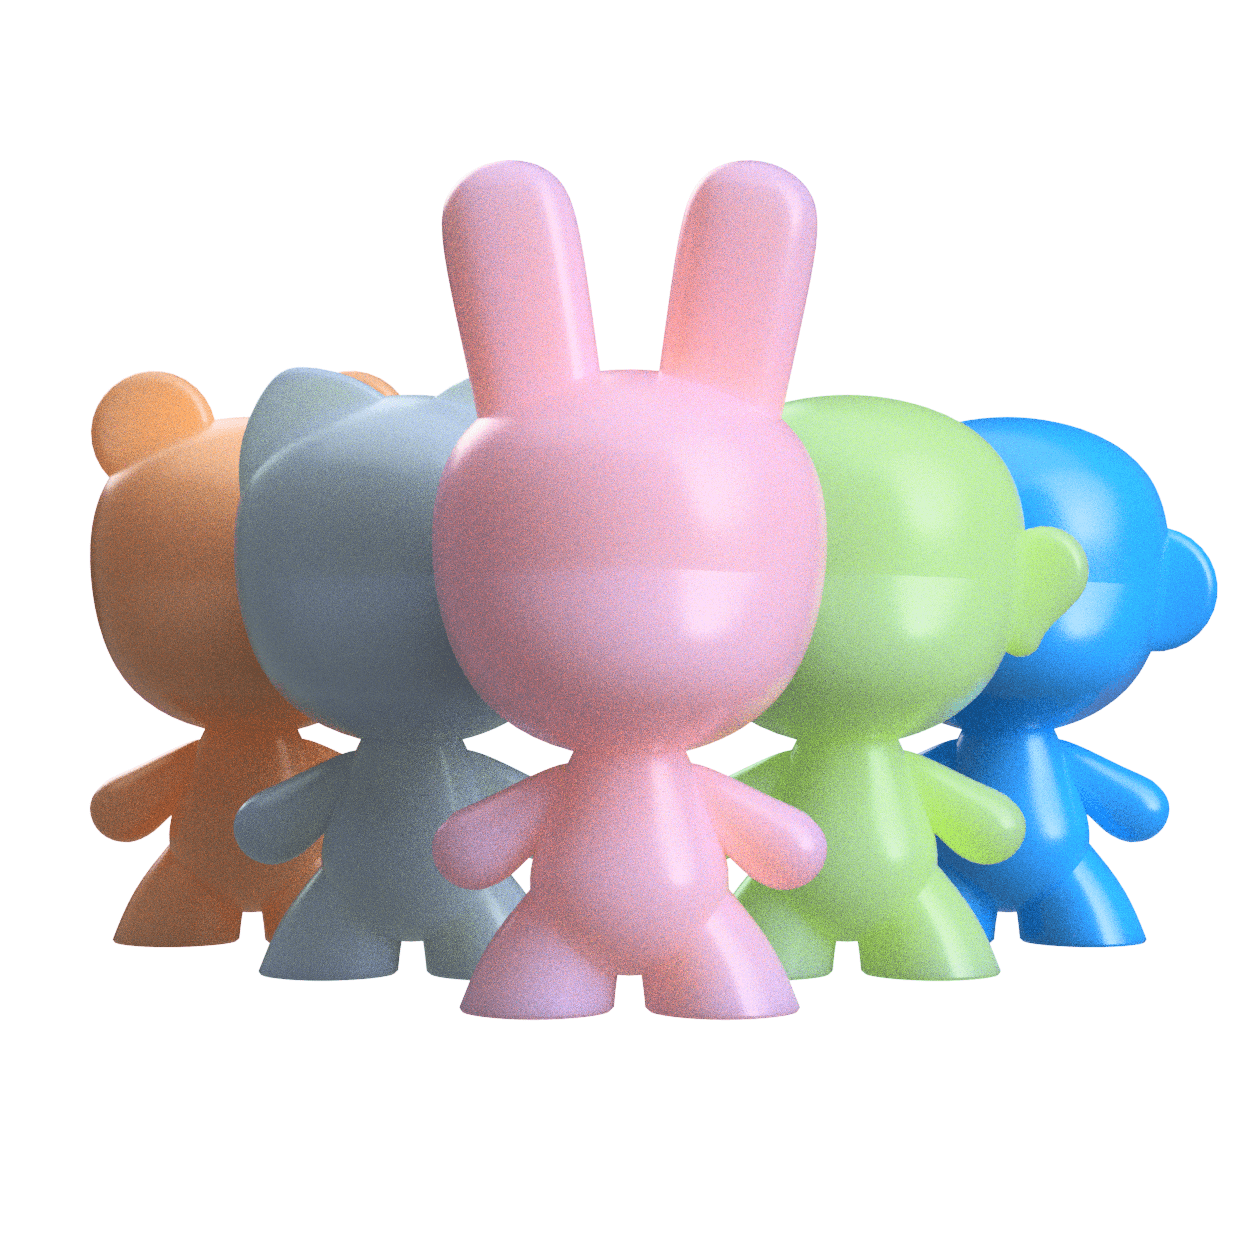 3D Printable Art Toy Figures Set - Bunny, Cat, Bear, Monkey, Human - For Commercial or Personal 3d model